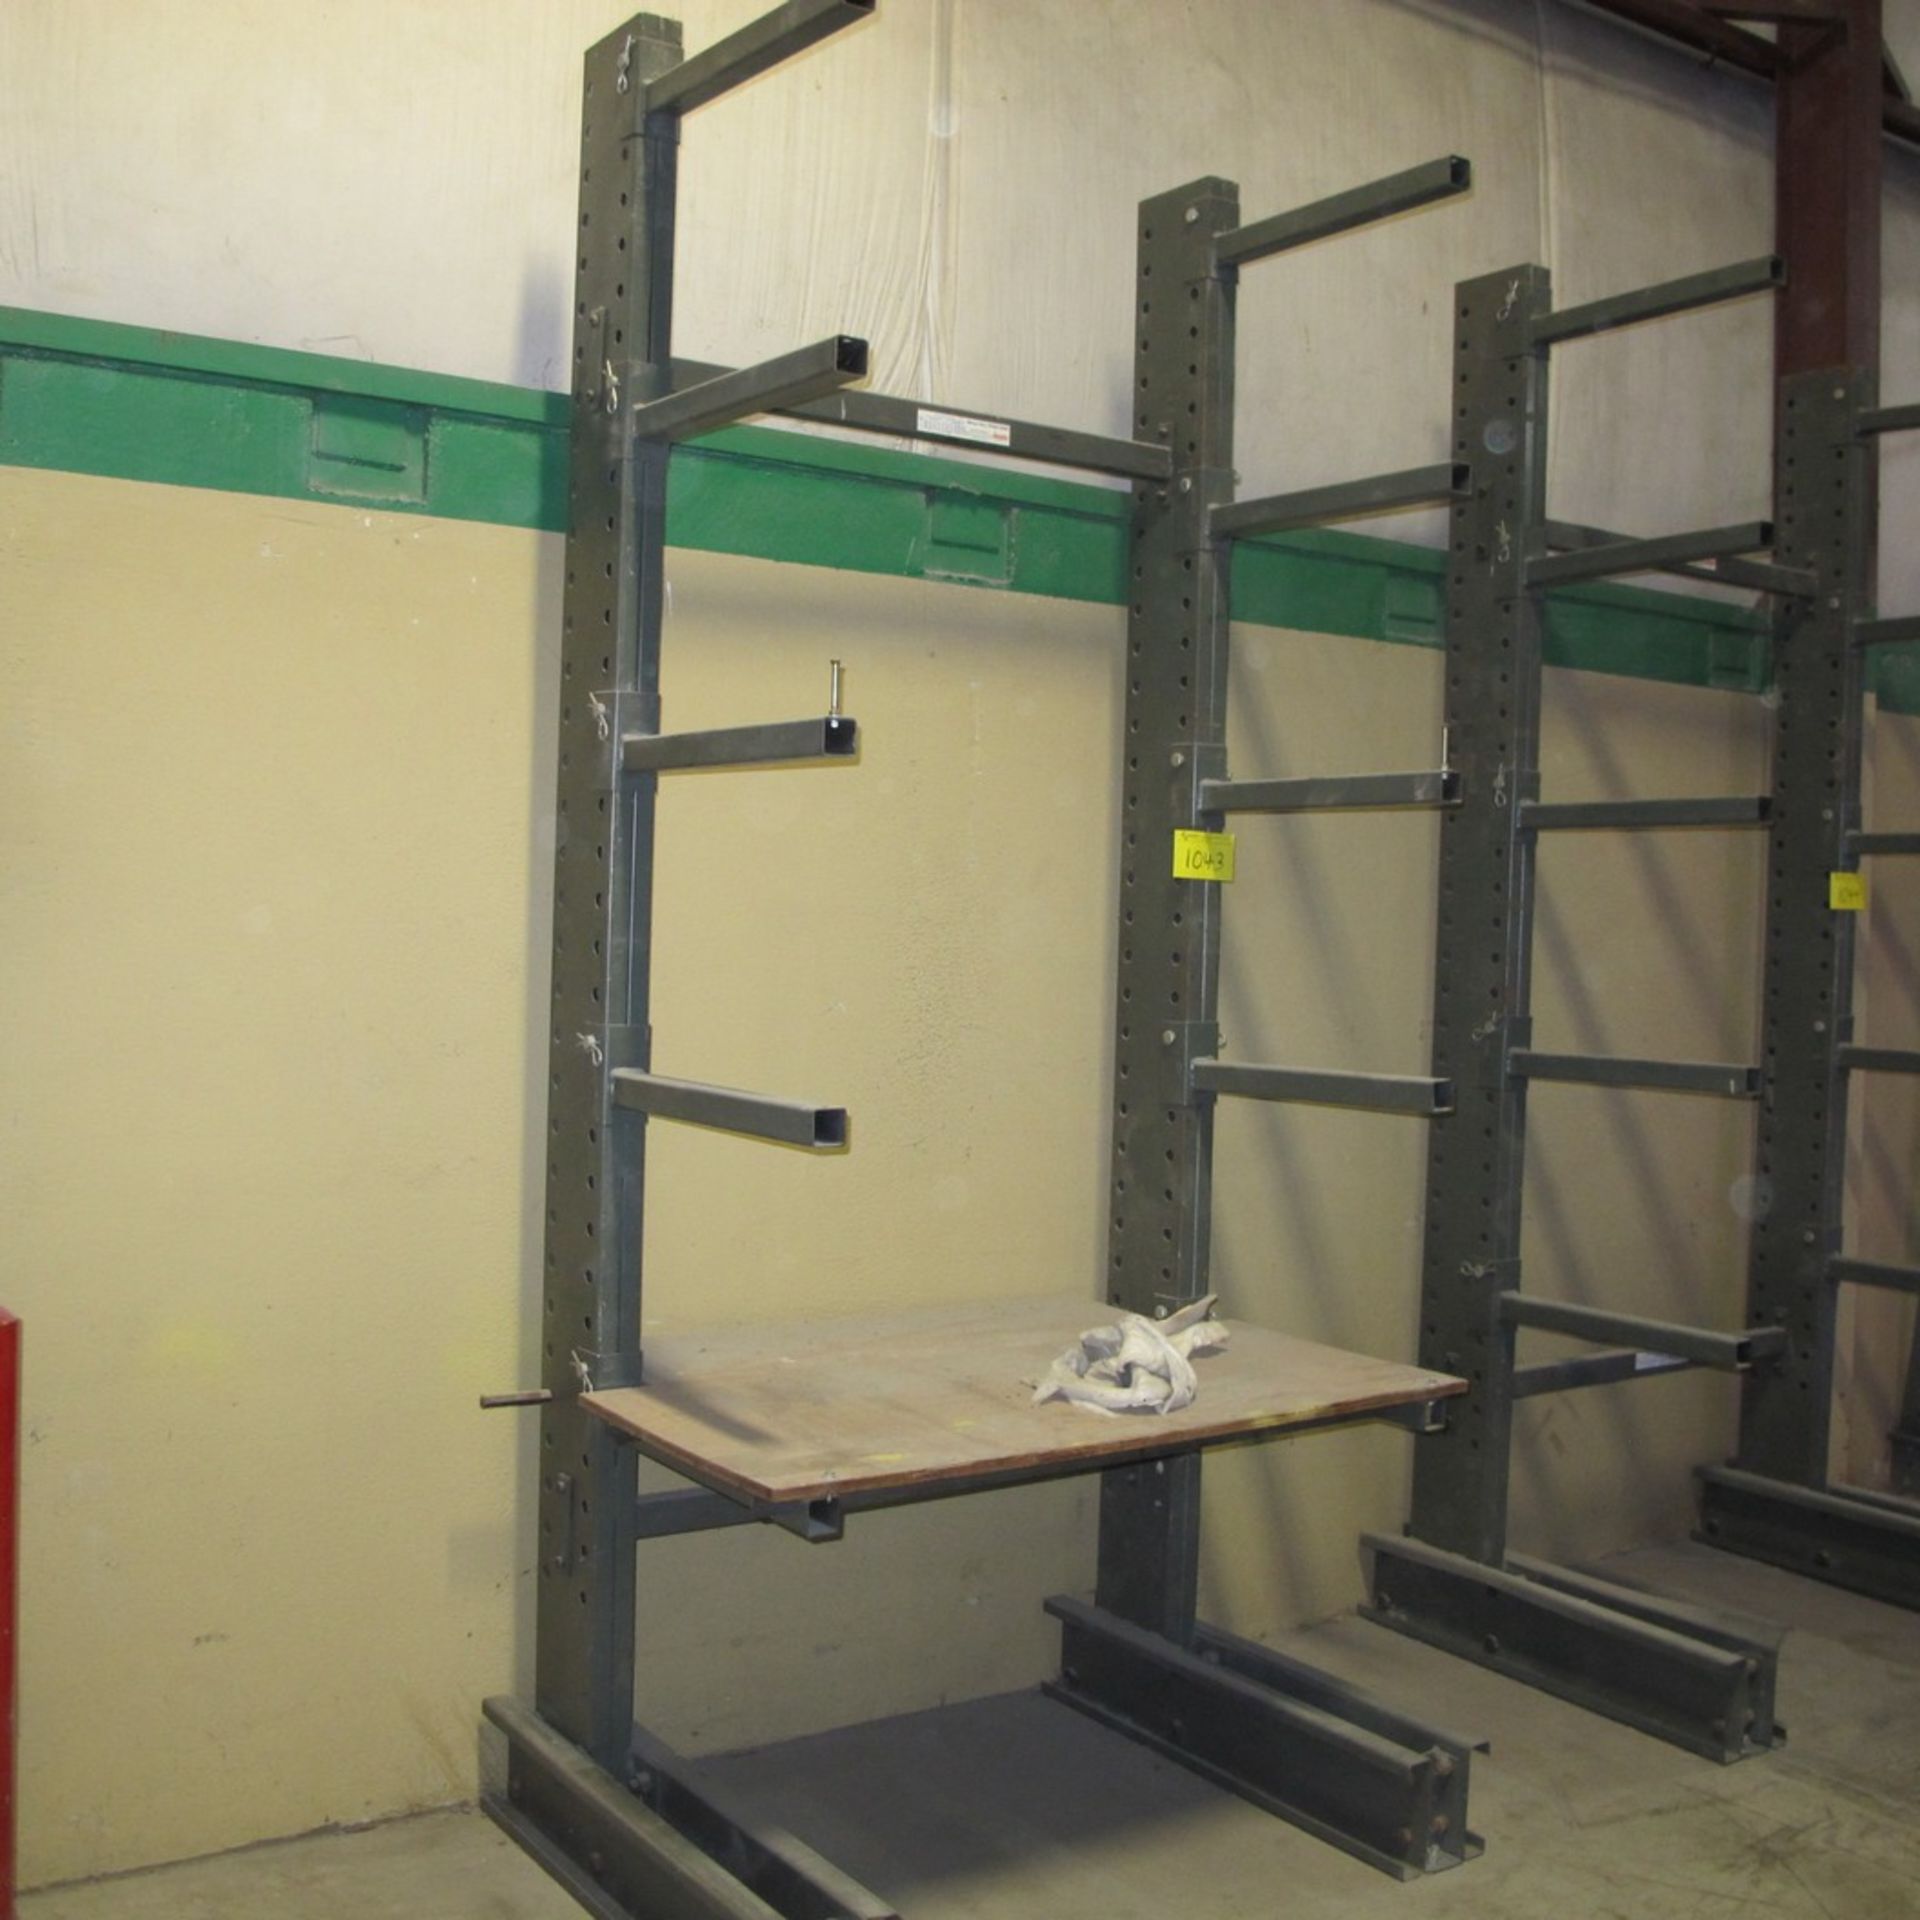 JARIKE STEEL STREE MEDIUM DUTY 6-LEVEL CANTILEVER RACK, APPROX. 10'H X 50"W X 40" AT BASE X 24" ARMS